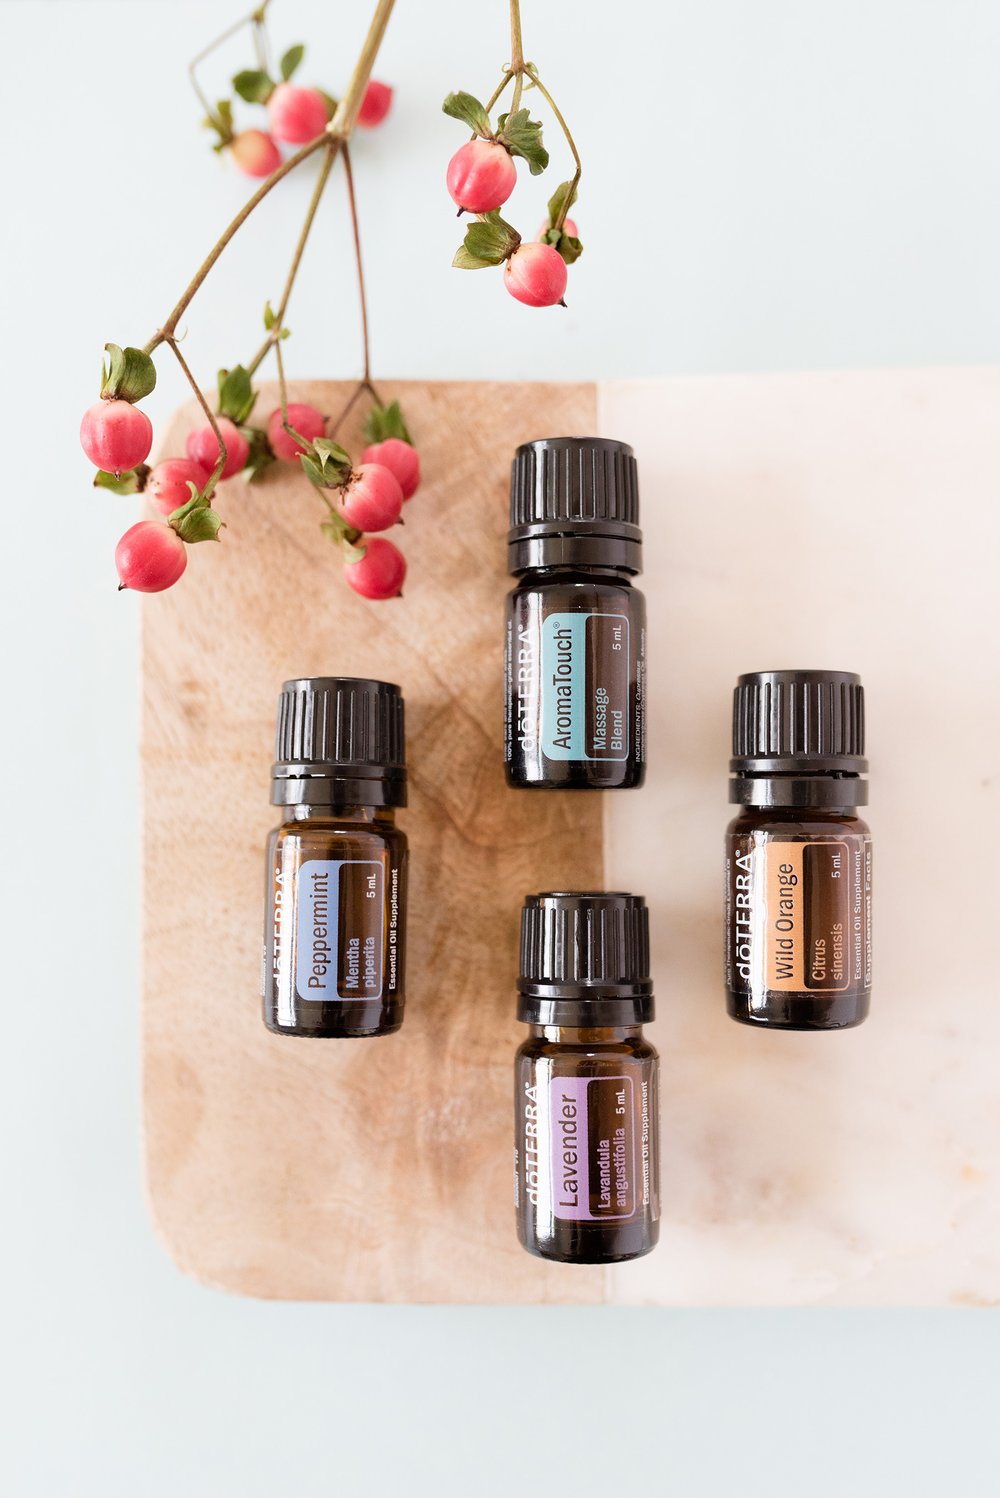 doTerra oils are simply the best quality oils out there and when you're traveling it can really help keep your immune system up and your anxiety down. Haha... 